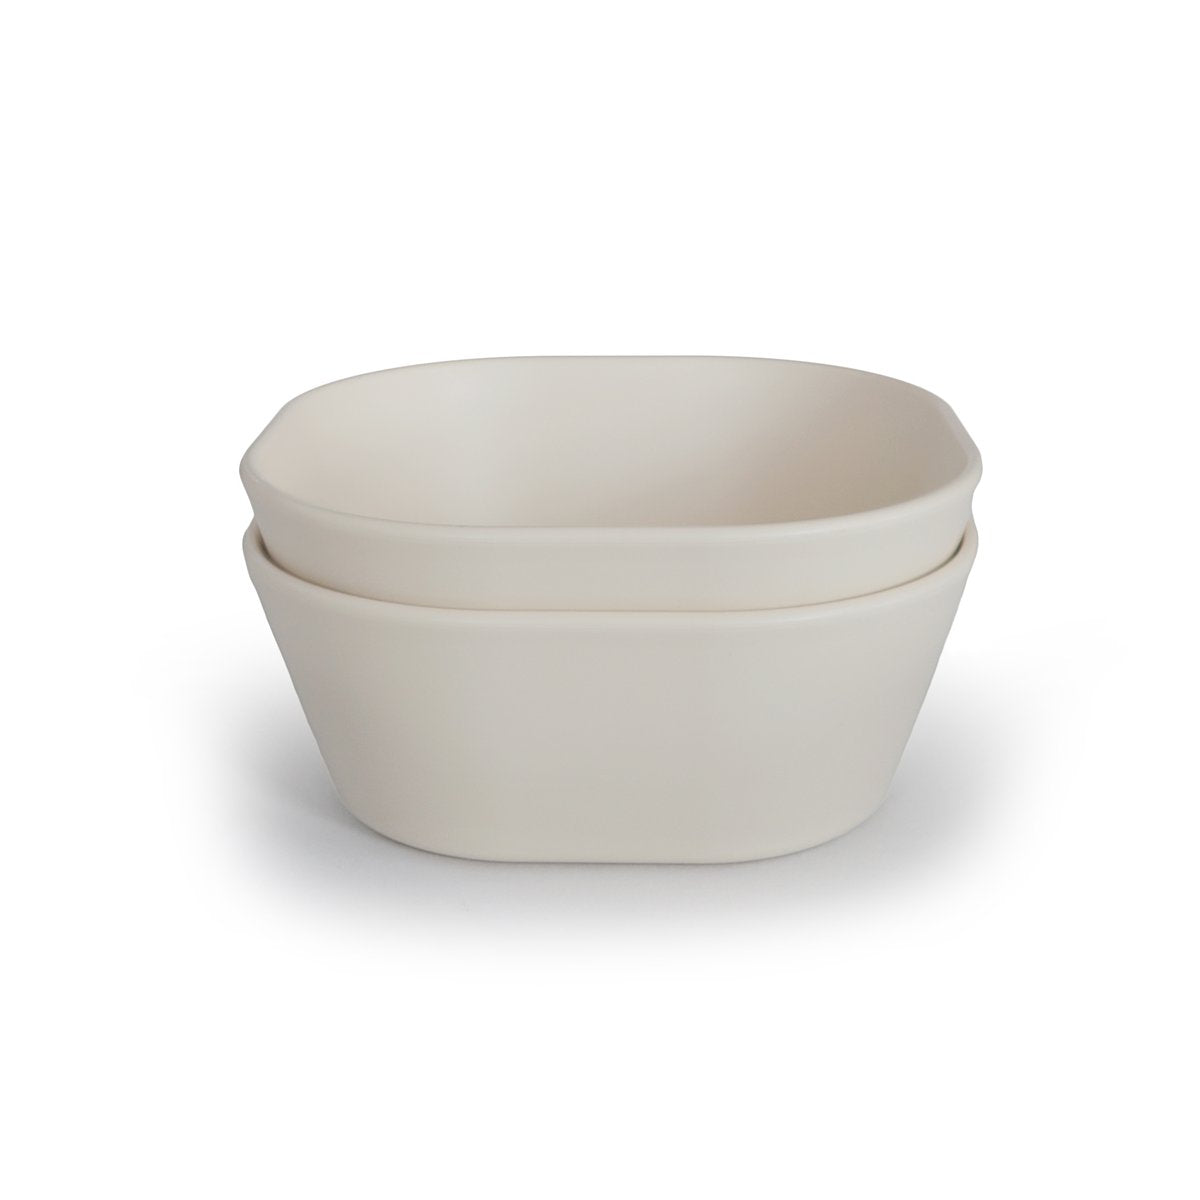 Mother Nature's Best Market Mushie Square Bowls Ivory (Set of 2) Cruelty-Free, Reusable/Recyclable